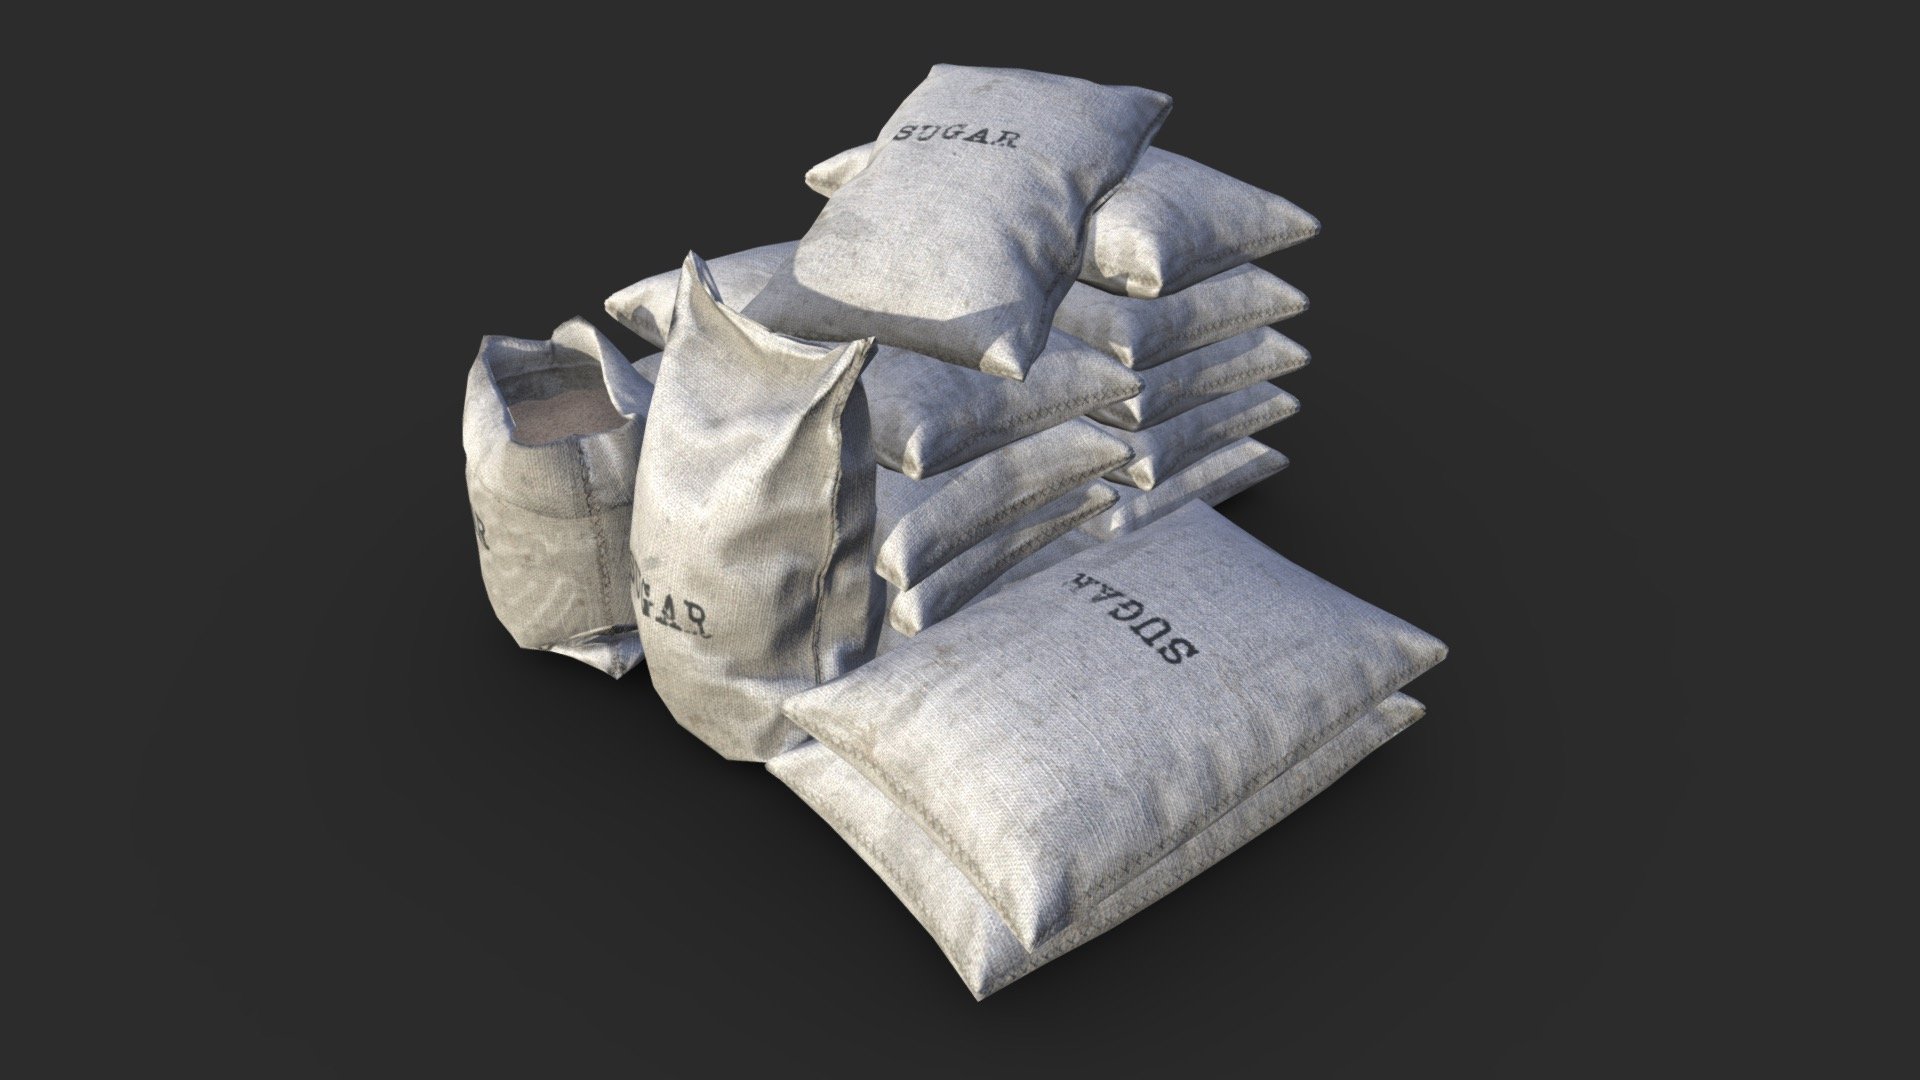 This vintage bulk bags assets pack including 10 individual bag sets and 2 content sets with 3 LODs and collision boxes. All elements can easily be positioned together to create a more detailed scene. Also, this pack includes 5 pre-assembled sets to allow you to speed up your assemblies.


Brown bag color variation included

This AAA game asset of old bulk bags will embellish you scene and add more details which can help the gameplay and the game-design.

Low-poly model &amp; Blender native 2.90

SPECIFICATIONS


Objects : 12
Polygons : 2817
Subdivision ready : No
Render engine : Eevee (Cycles ready)

GAME SPECS


LODs : Yes (inside FBX for Unity &amp; Unreal)
Numbers of LODs : 3
Collider : Yes
Lightmap UV : No

EXPORTED FORMATS


FBX
Collada
OBJ

TEXTURES


Materials in scene : 1
Textures sizes : 4K
Textures types : Base Color, Metallic, Roughness, Normal (DirectX &amp; OpenGL), Heigh &amp; AO (also Unity &amp; Unreal workflow maps)
Textures format : PNG
 - Sugar Old Bags Assets - Buy Royalty Free 3D model by KangaroOz 3D (@KangaroOz-3D) 3d model